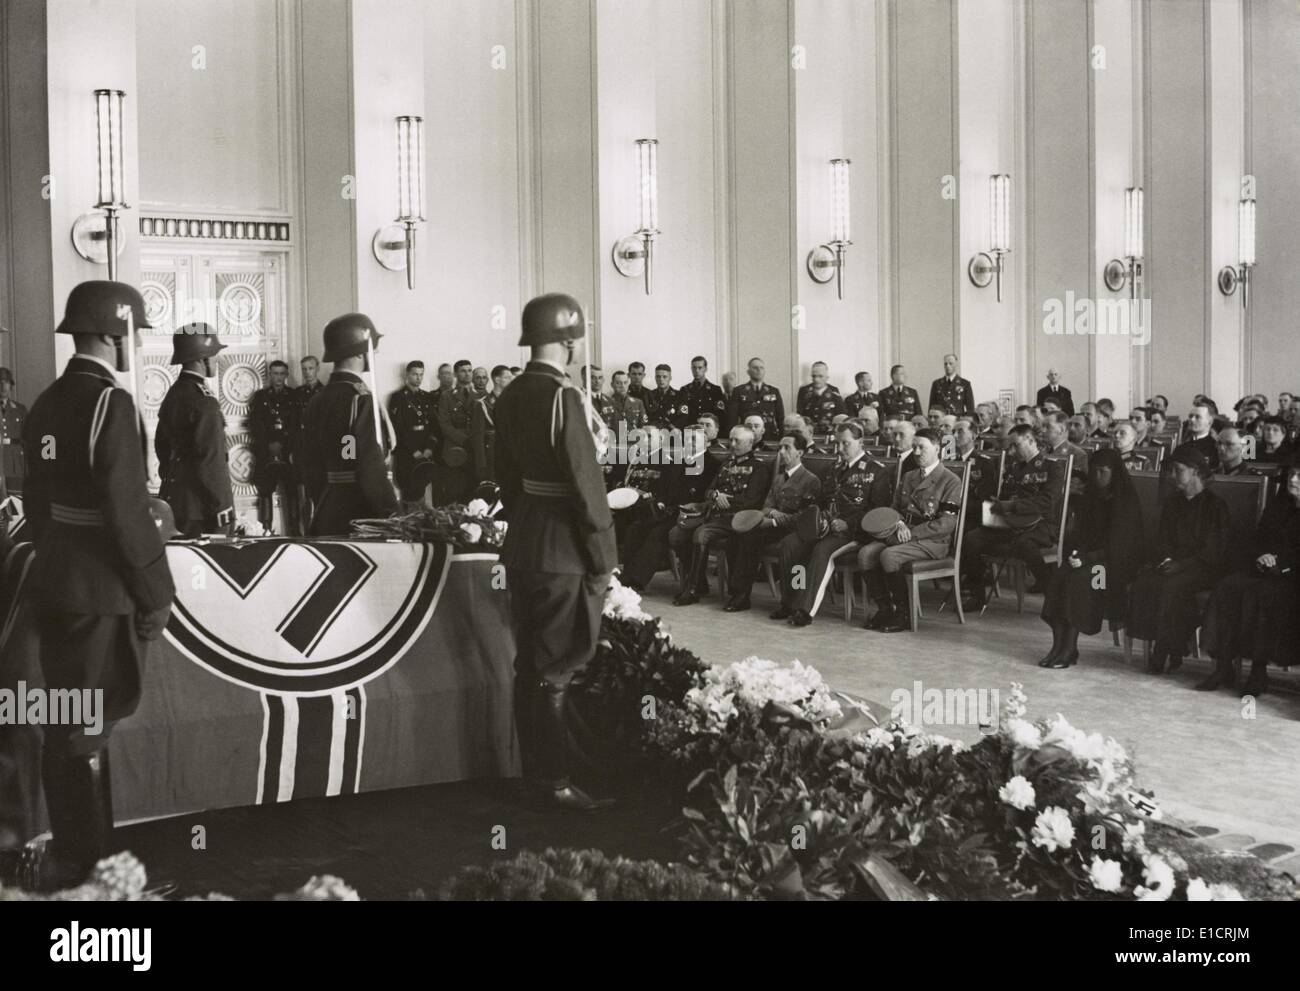 Adolf Hitler, Hermann Goering, and Joseph Goebbels, at a Nazi funeral, May 27, 1937. Hauptmann (captain) Mantius, was the First Stock Photo